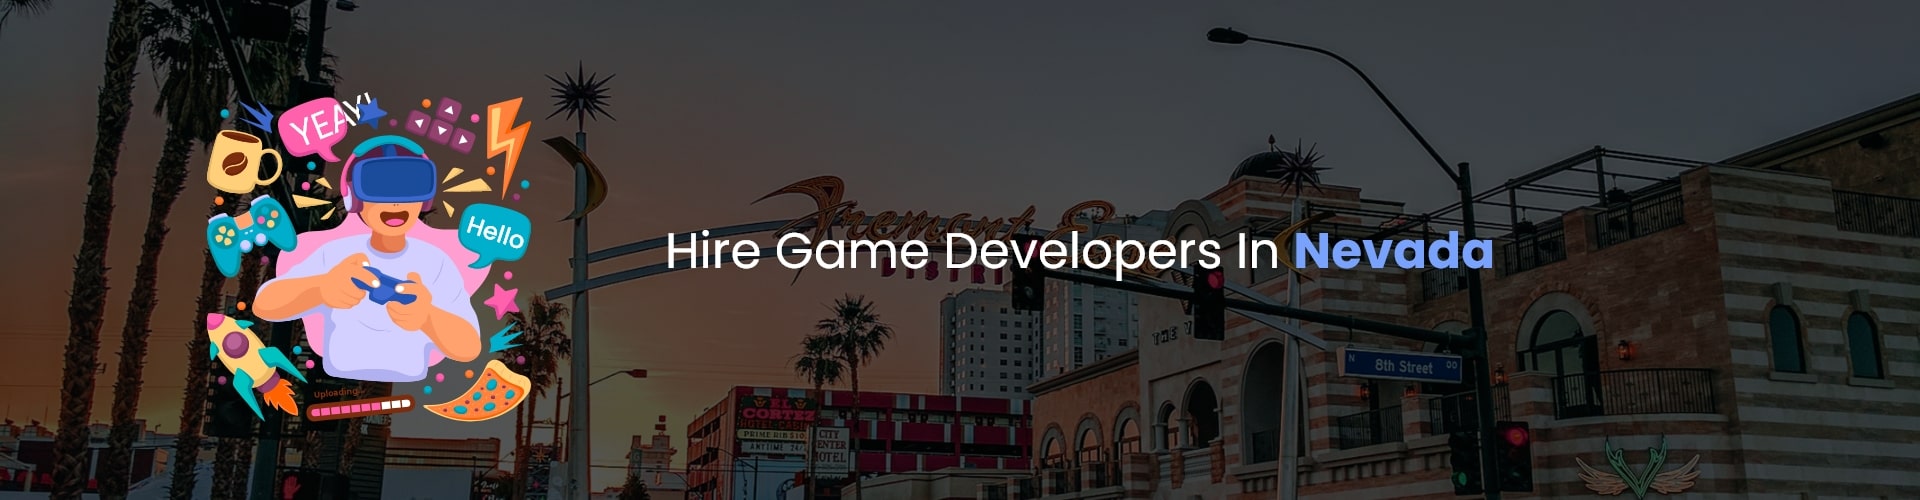 hire game developers in vevada